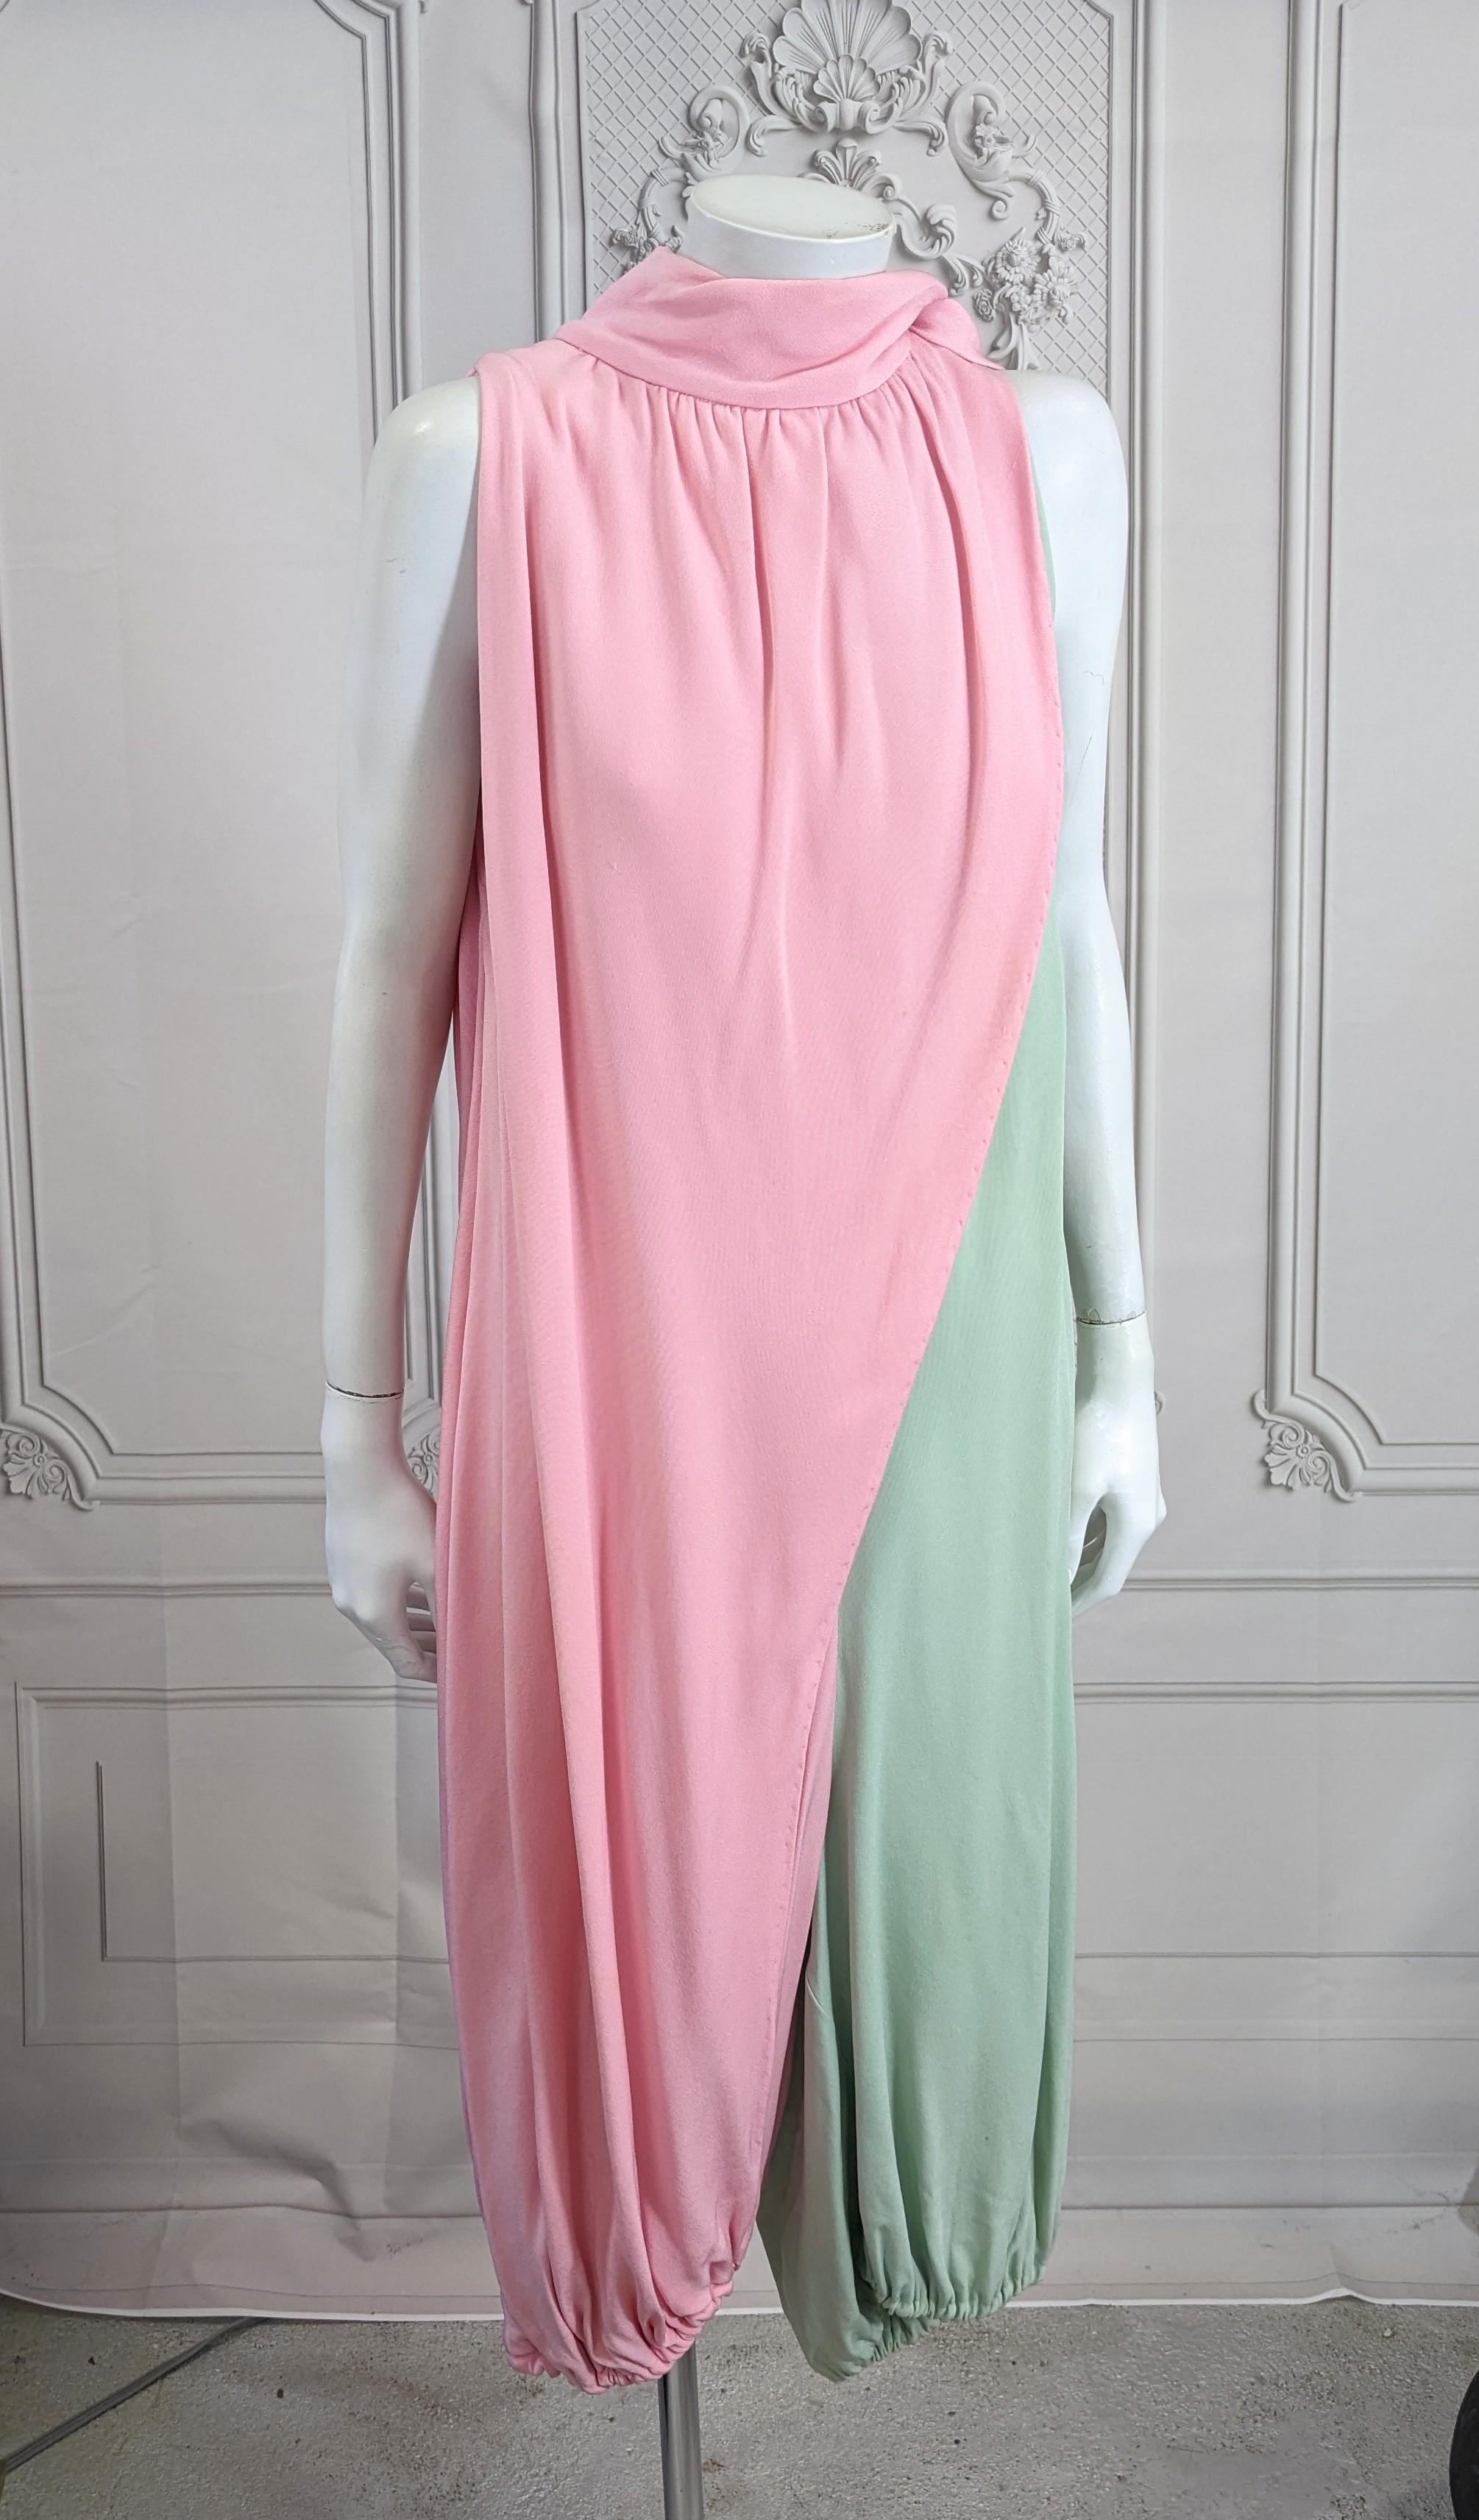 Unusual Bill Blass Bicolor Crepe Balloon Jumpsuit from the 1960's designed for Maurice Rentner. 
Heavy silk blend crepe in sherbert pink and mint which wraps and ties at shoulder with a scarf neckline. Pink and green sections are bisected down front